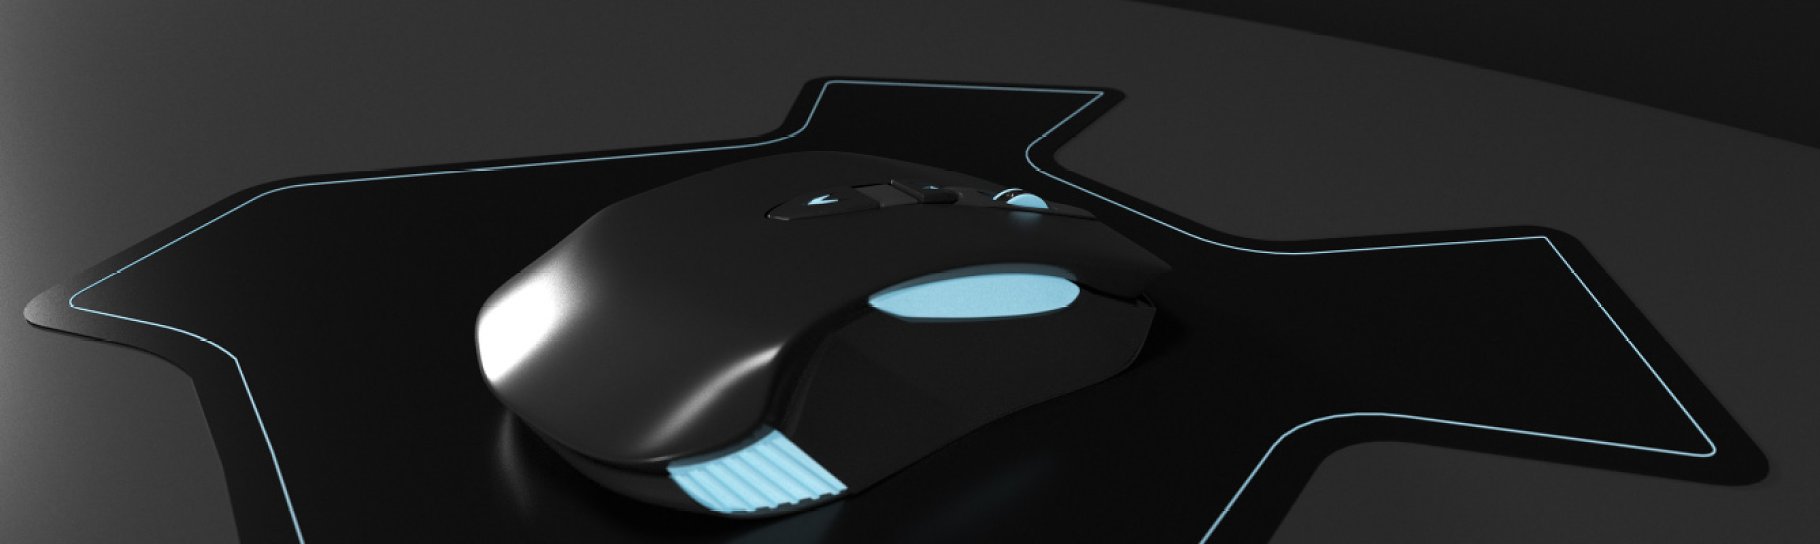 Rendering a gorgeous 3d model of a gaming mouse